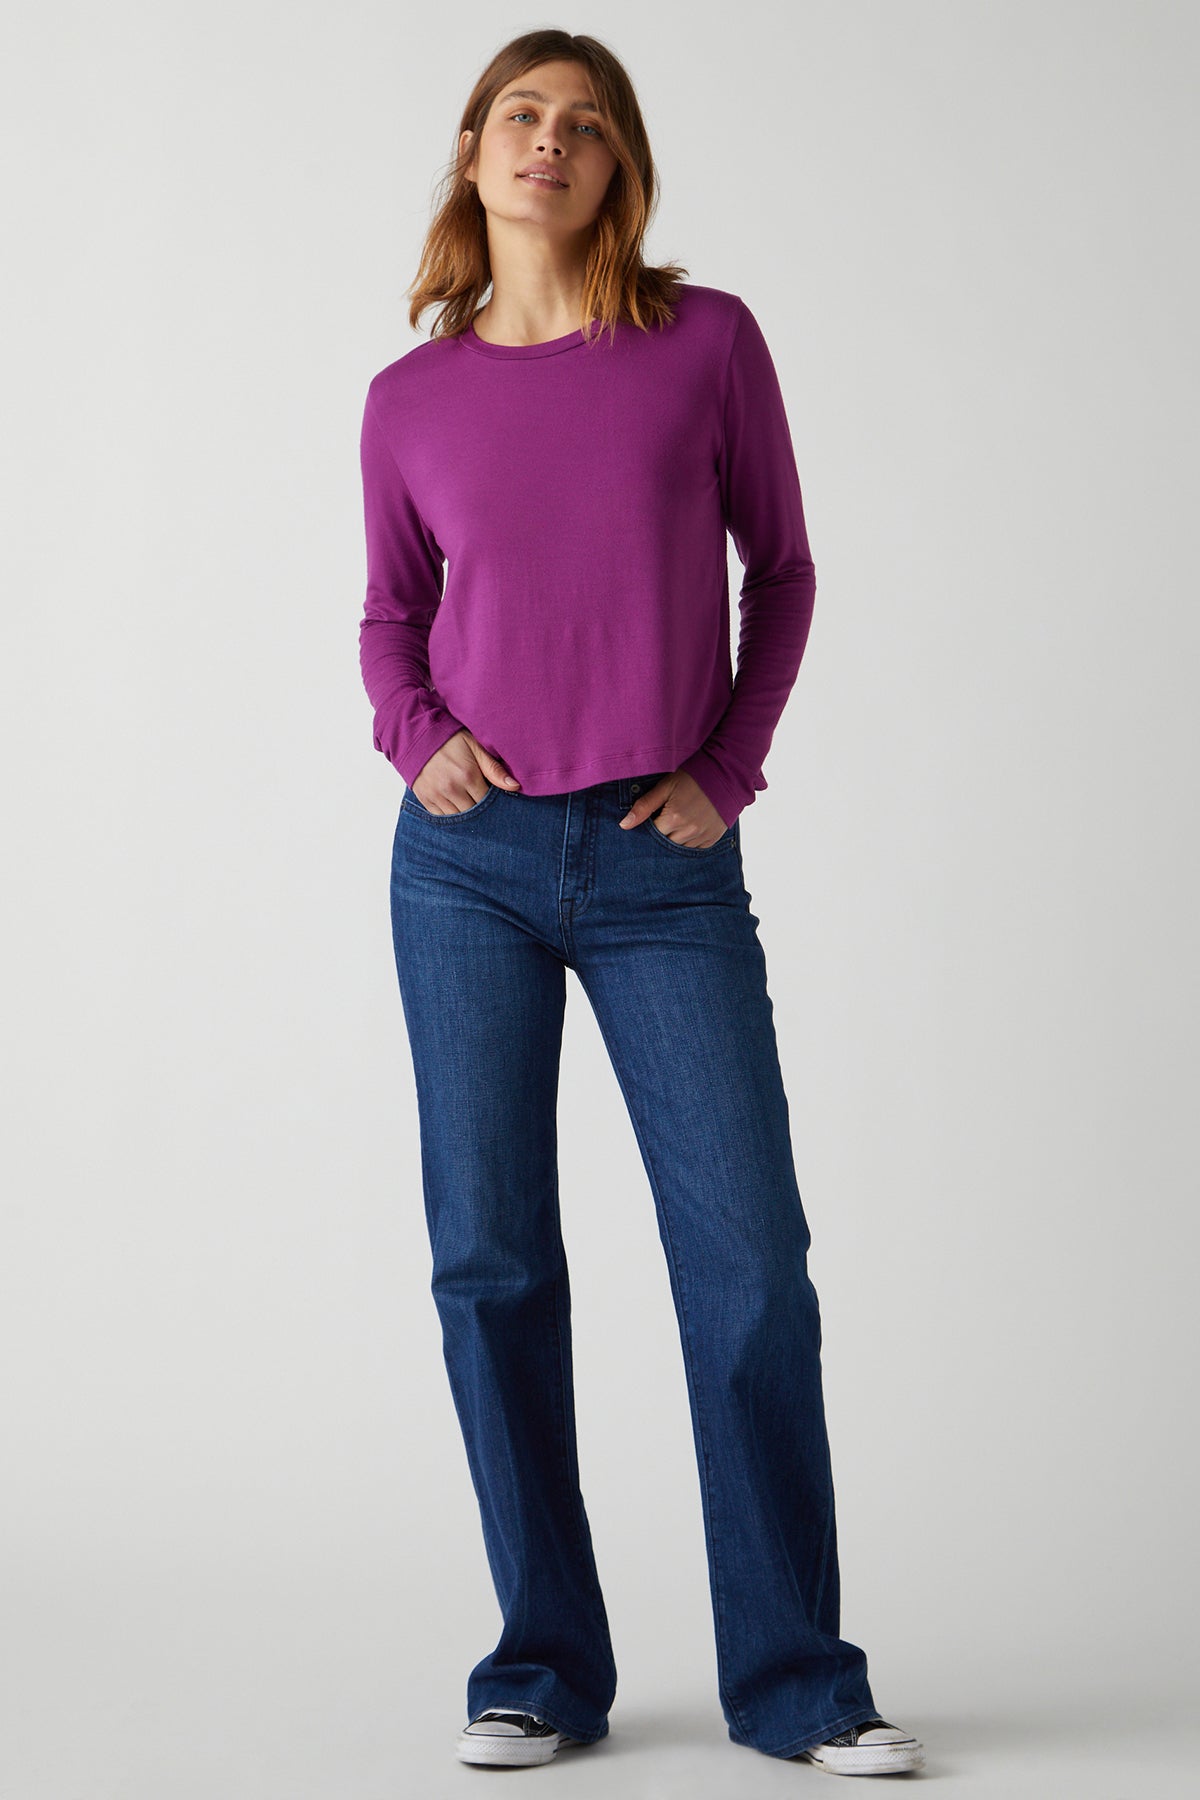   A woman wearing a Pacifica Tee by Velvet by Jenny Graham, a rib knit long-sleeved top in purple, and slim-fit blue jeans. 